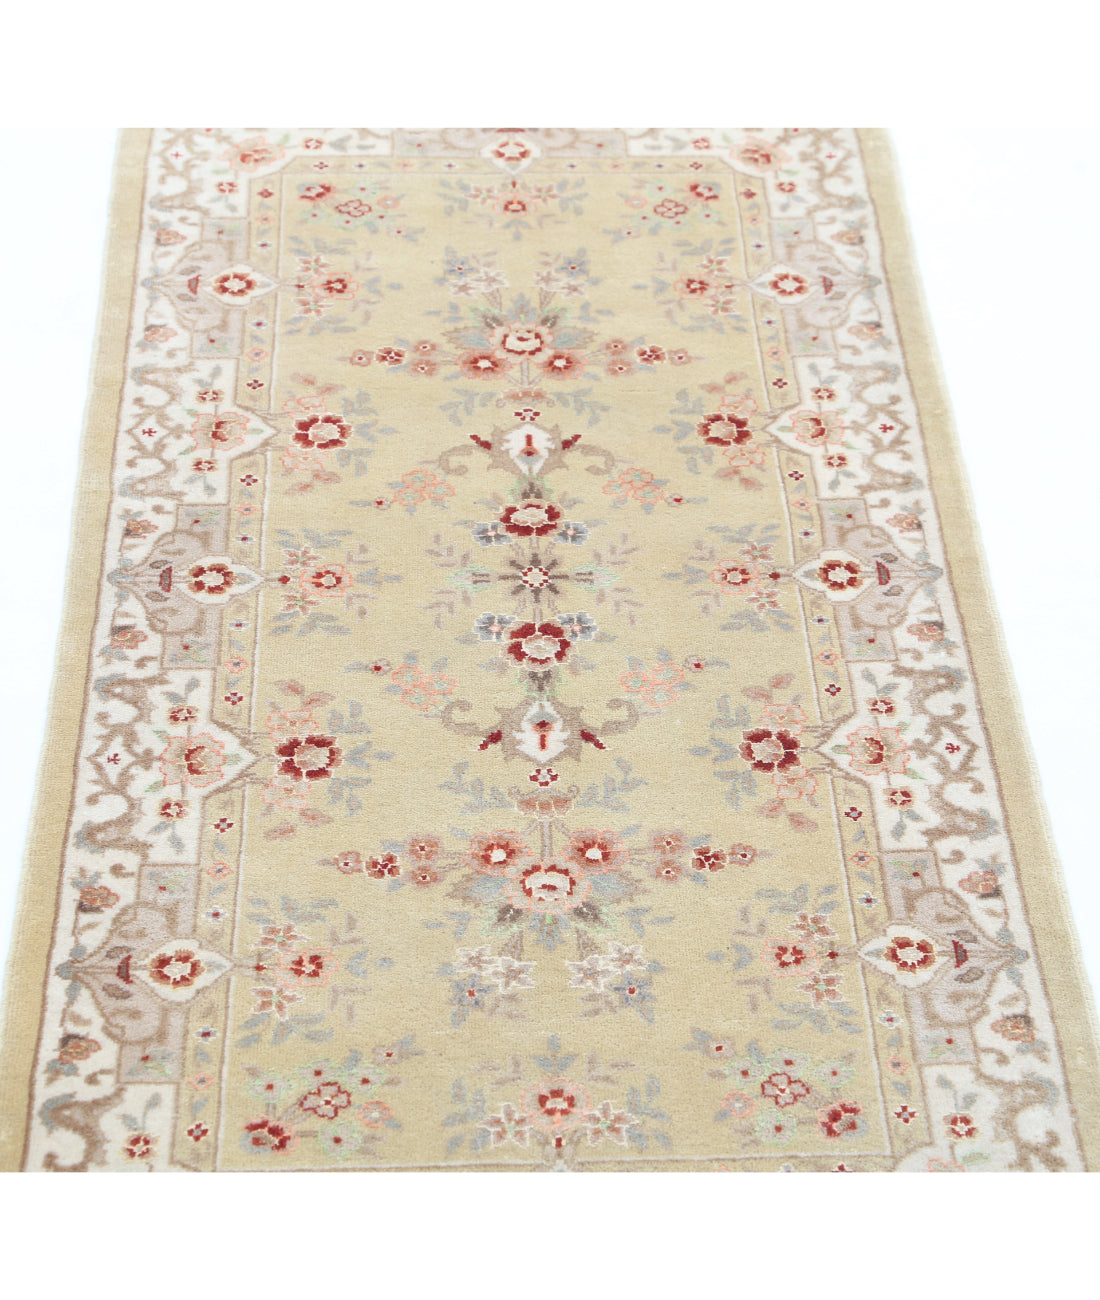 Hand Knotted Agra Kashan Wool Rug - 2'0'' x 4'2'' 2'0'' x 4'2'' (240 X 298) / Gold / Ivory